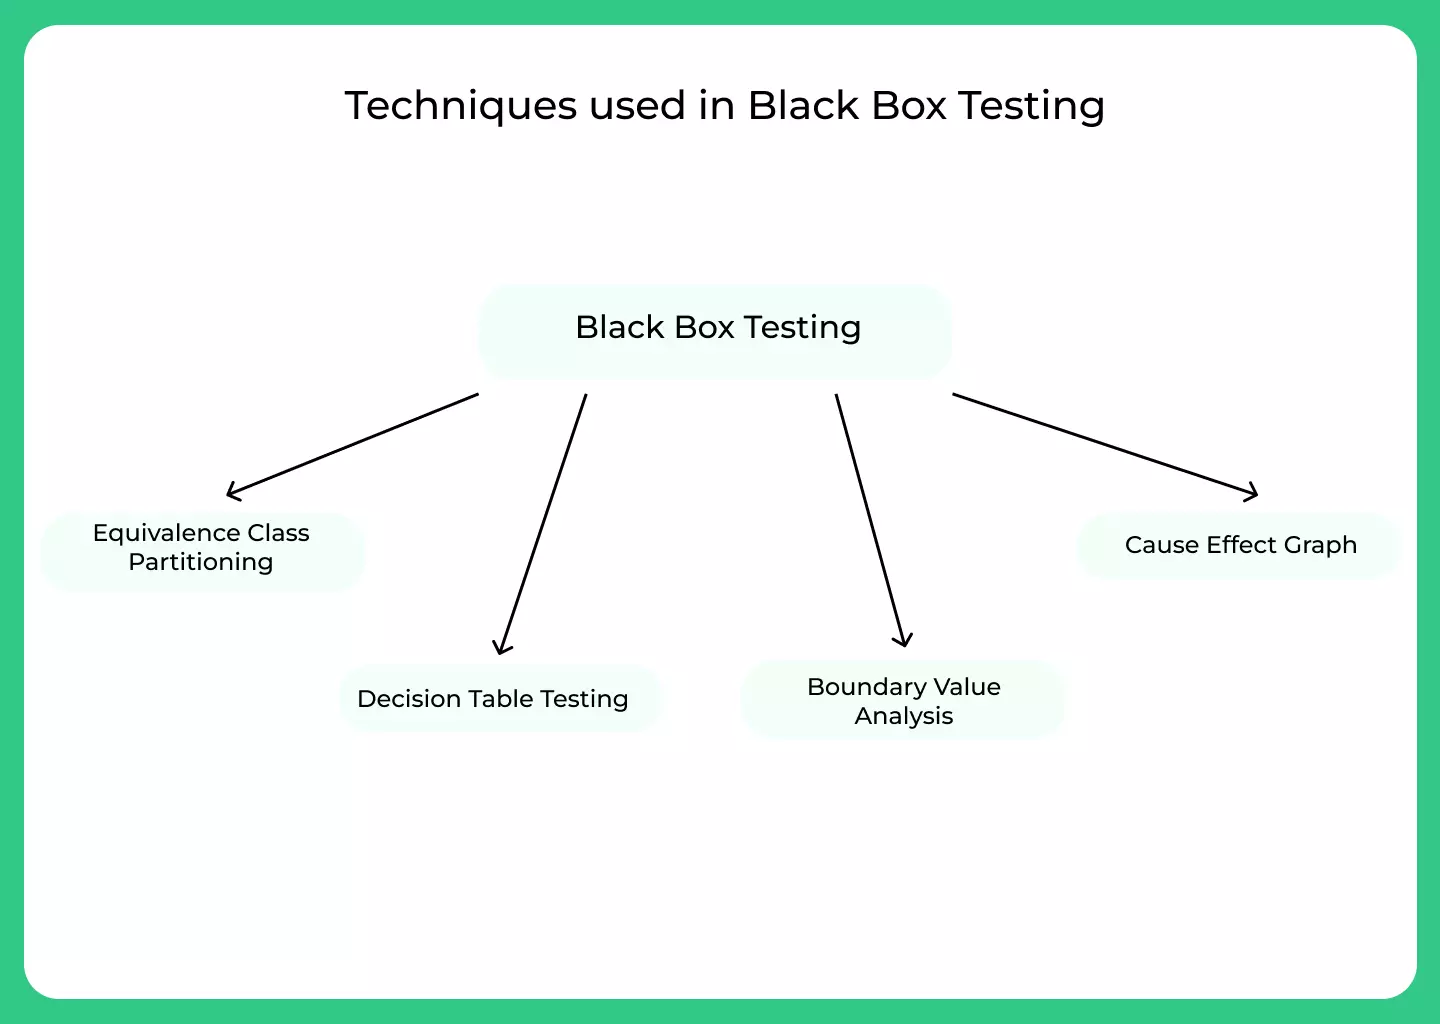 Techniques used in Black Box Testing